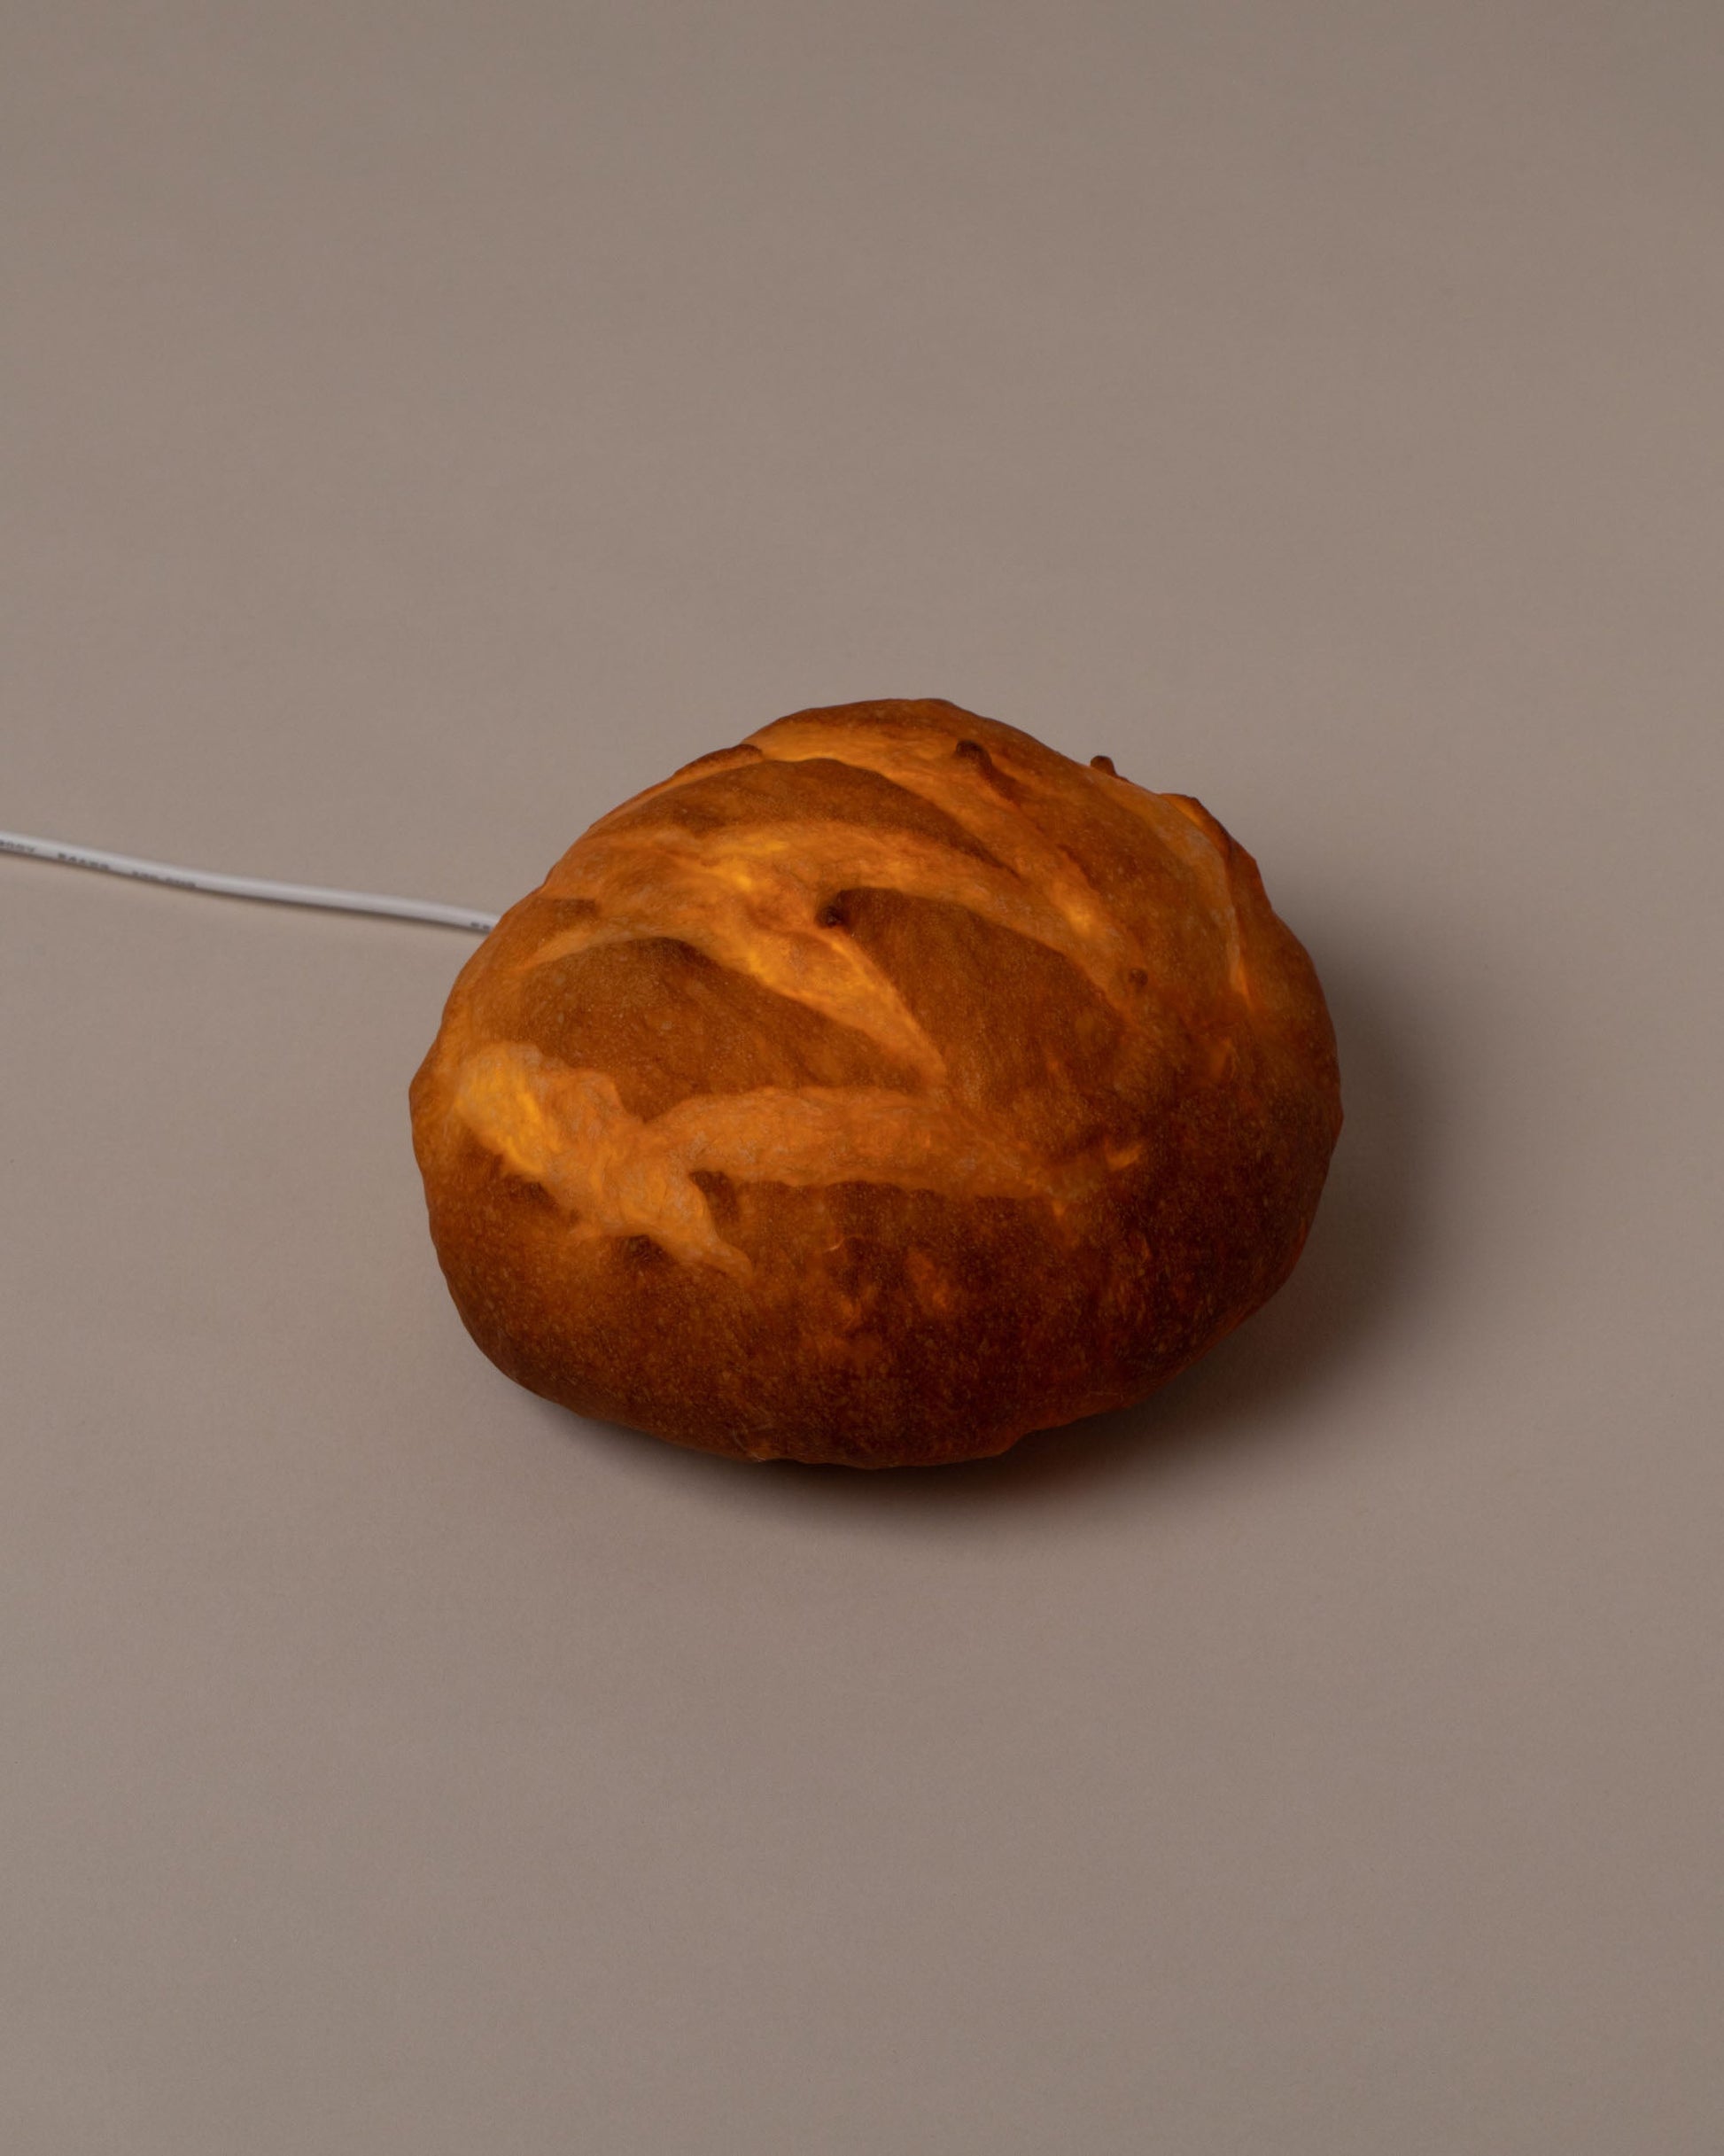  Pampshade Boule Lamp on light color background.